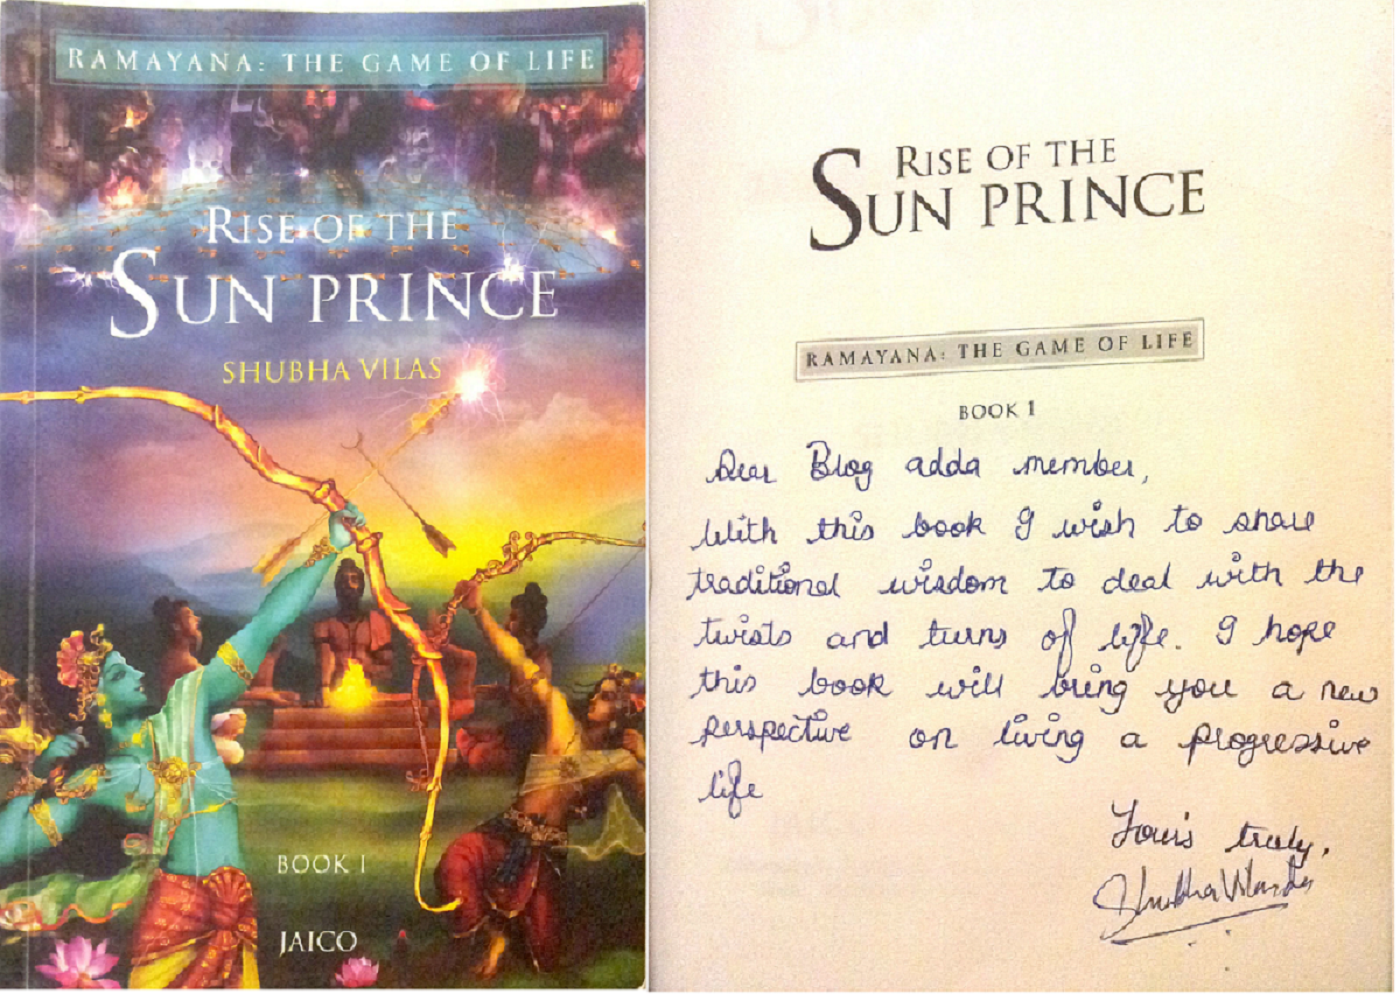 Ramayana : The Game of Life: Rise of the Sun Prince